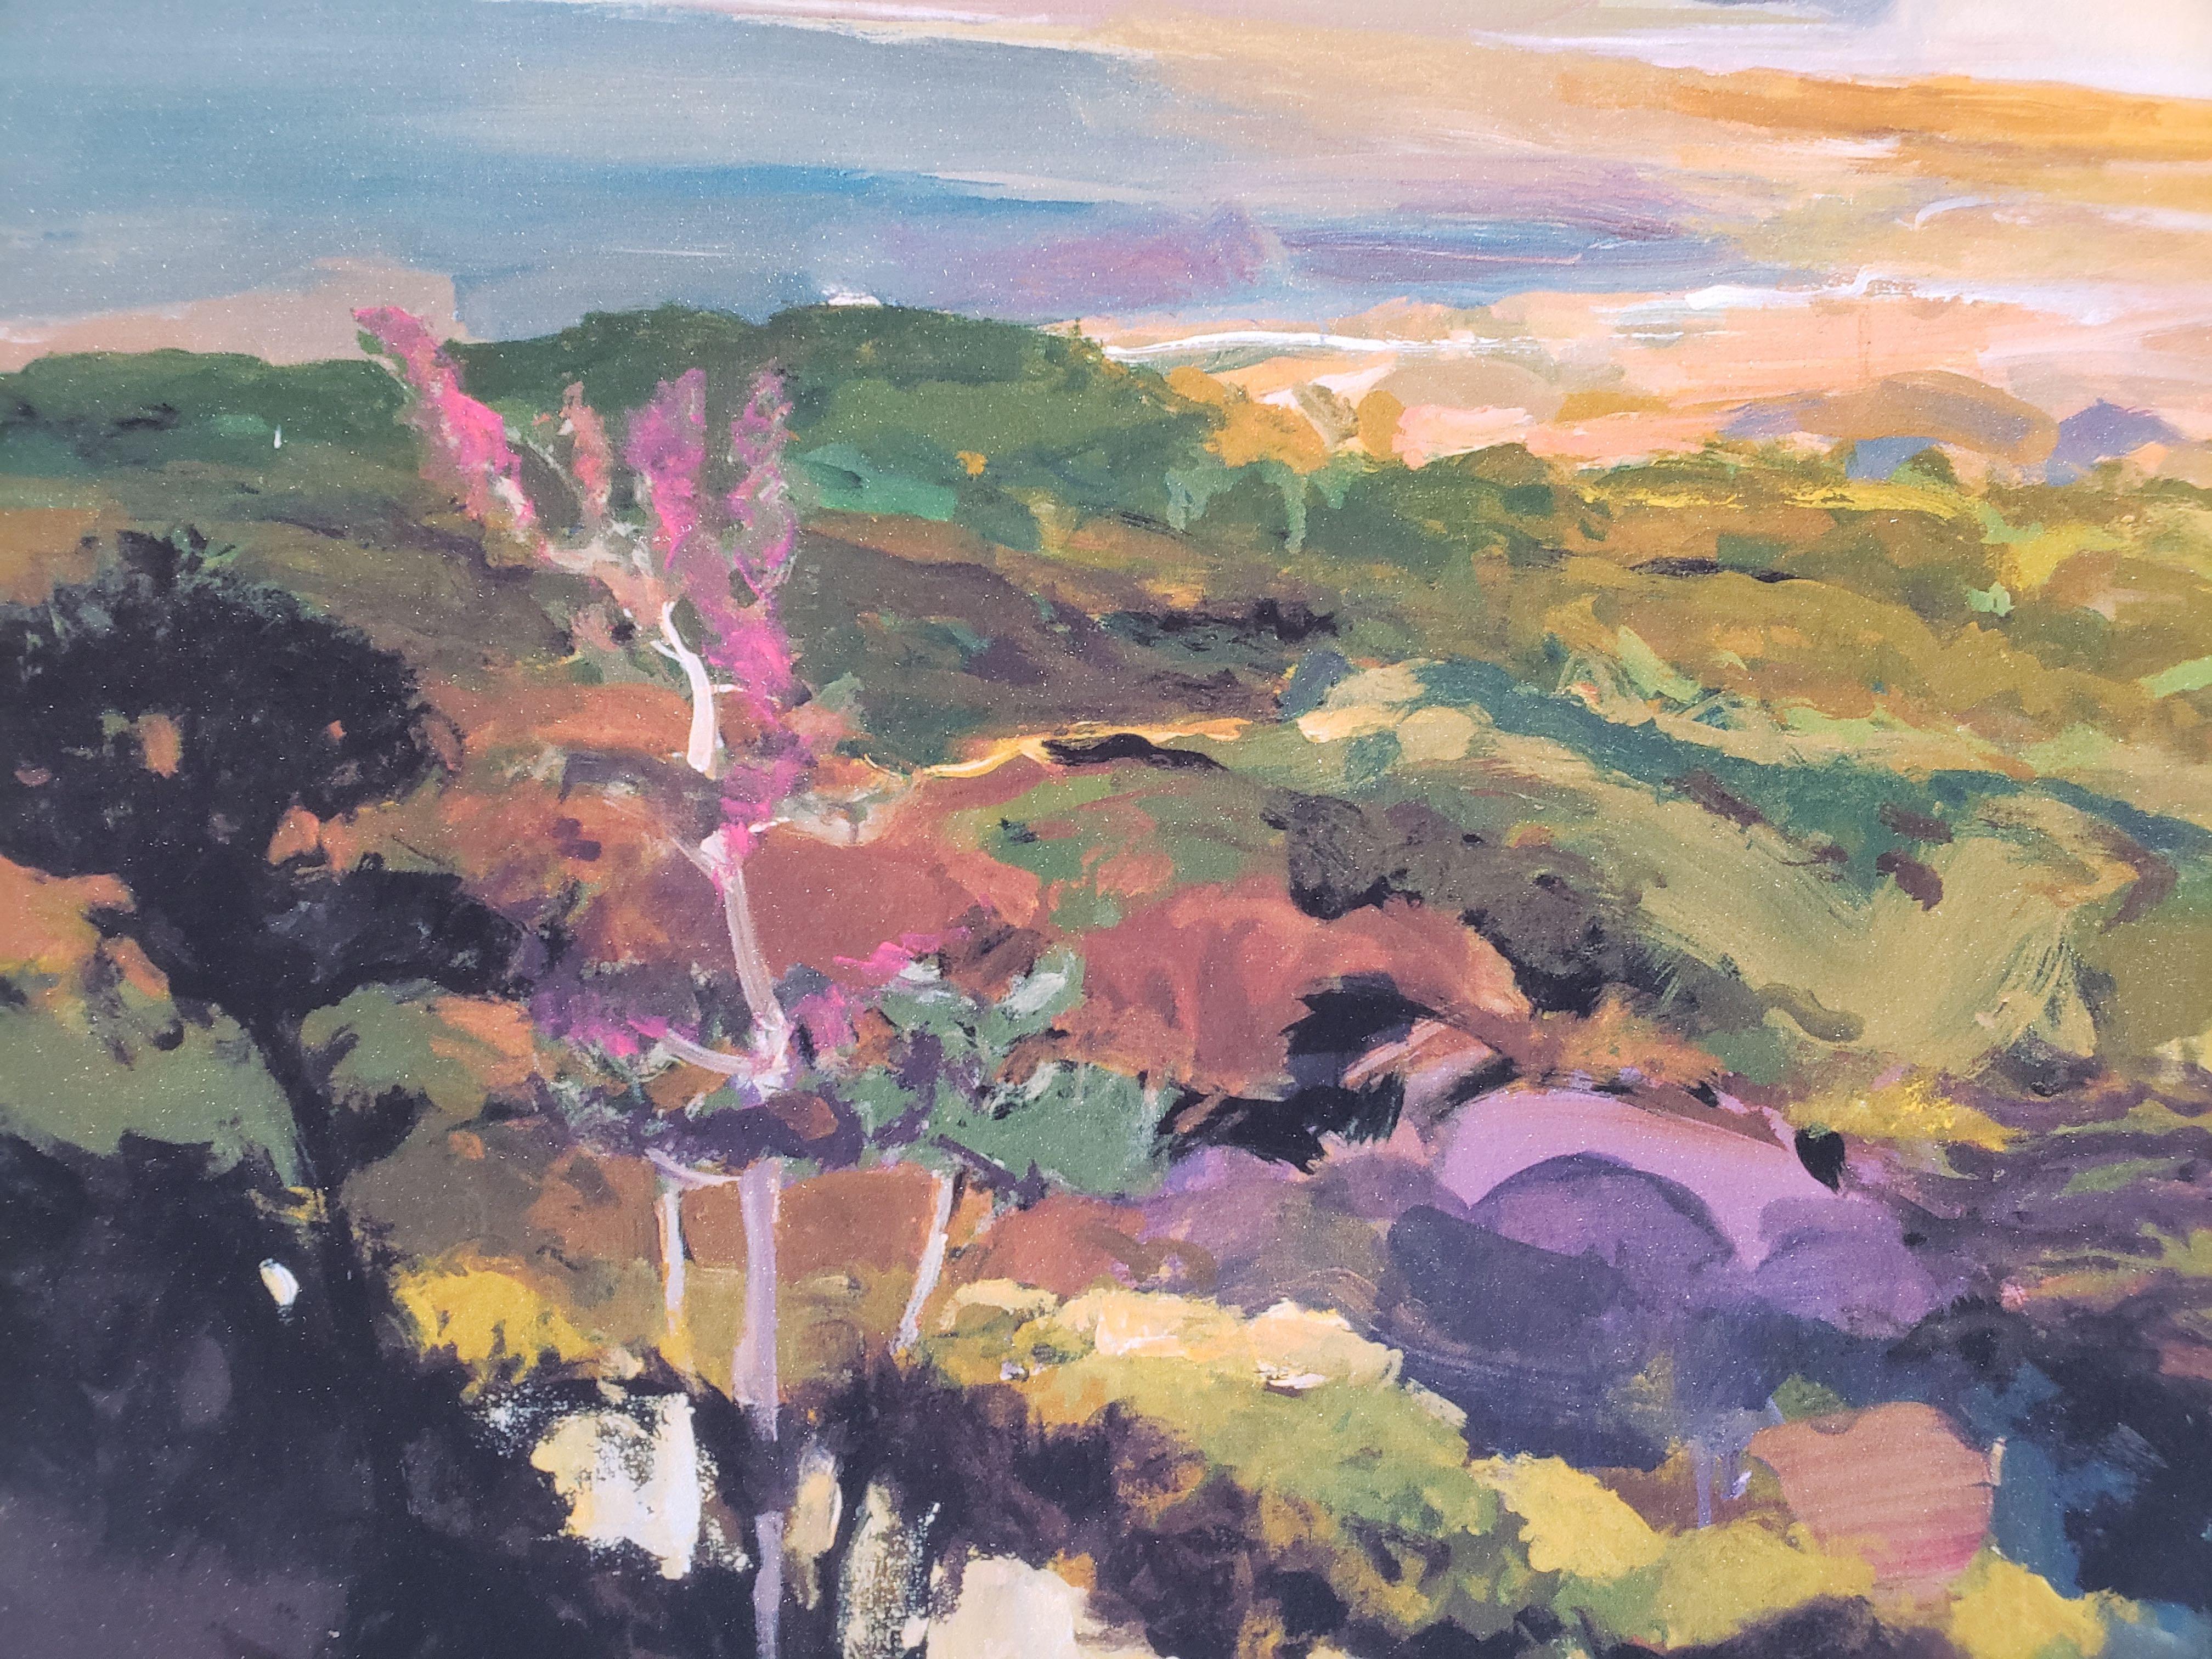 This limited edition print by California painter John Maxon features an impressionist-inspired landscape in the artist's characteristic palette of earth tones accentuated with splashes of purple, pink, and peach. Maxon's landscapes often depict the